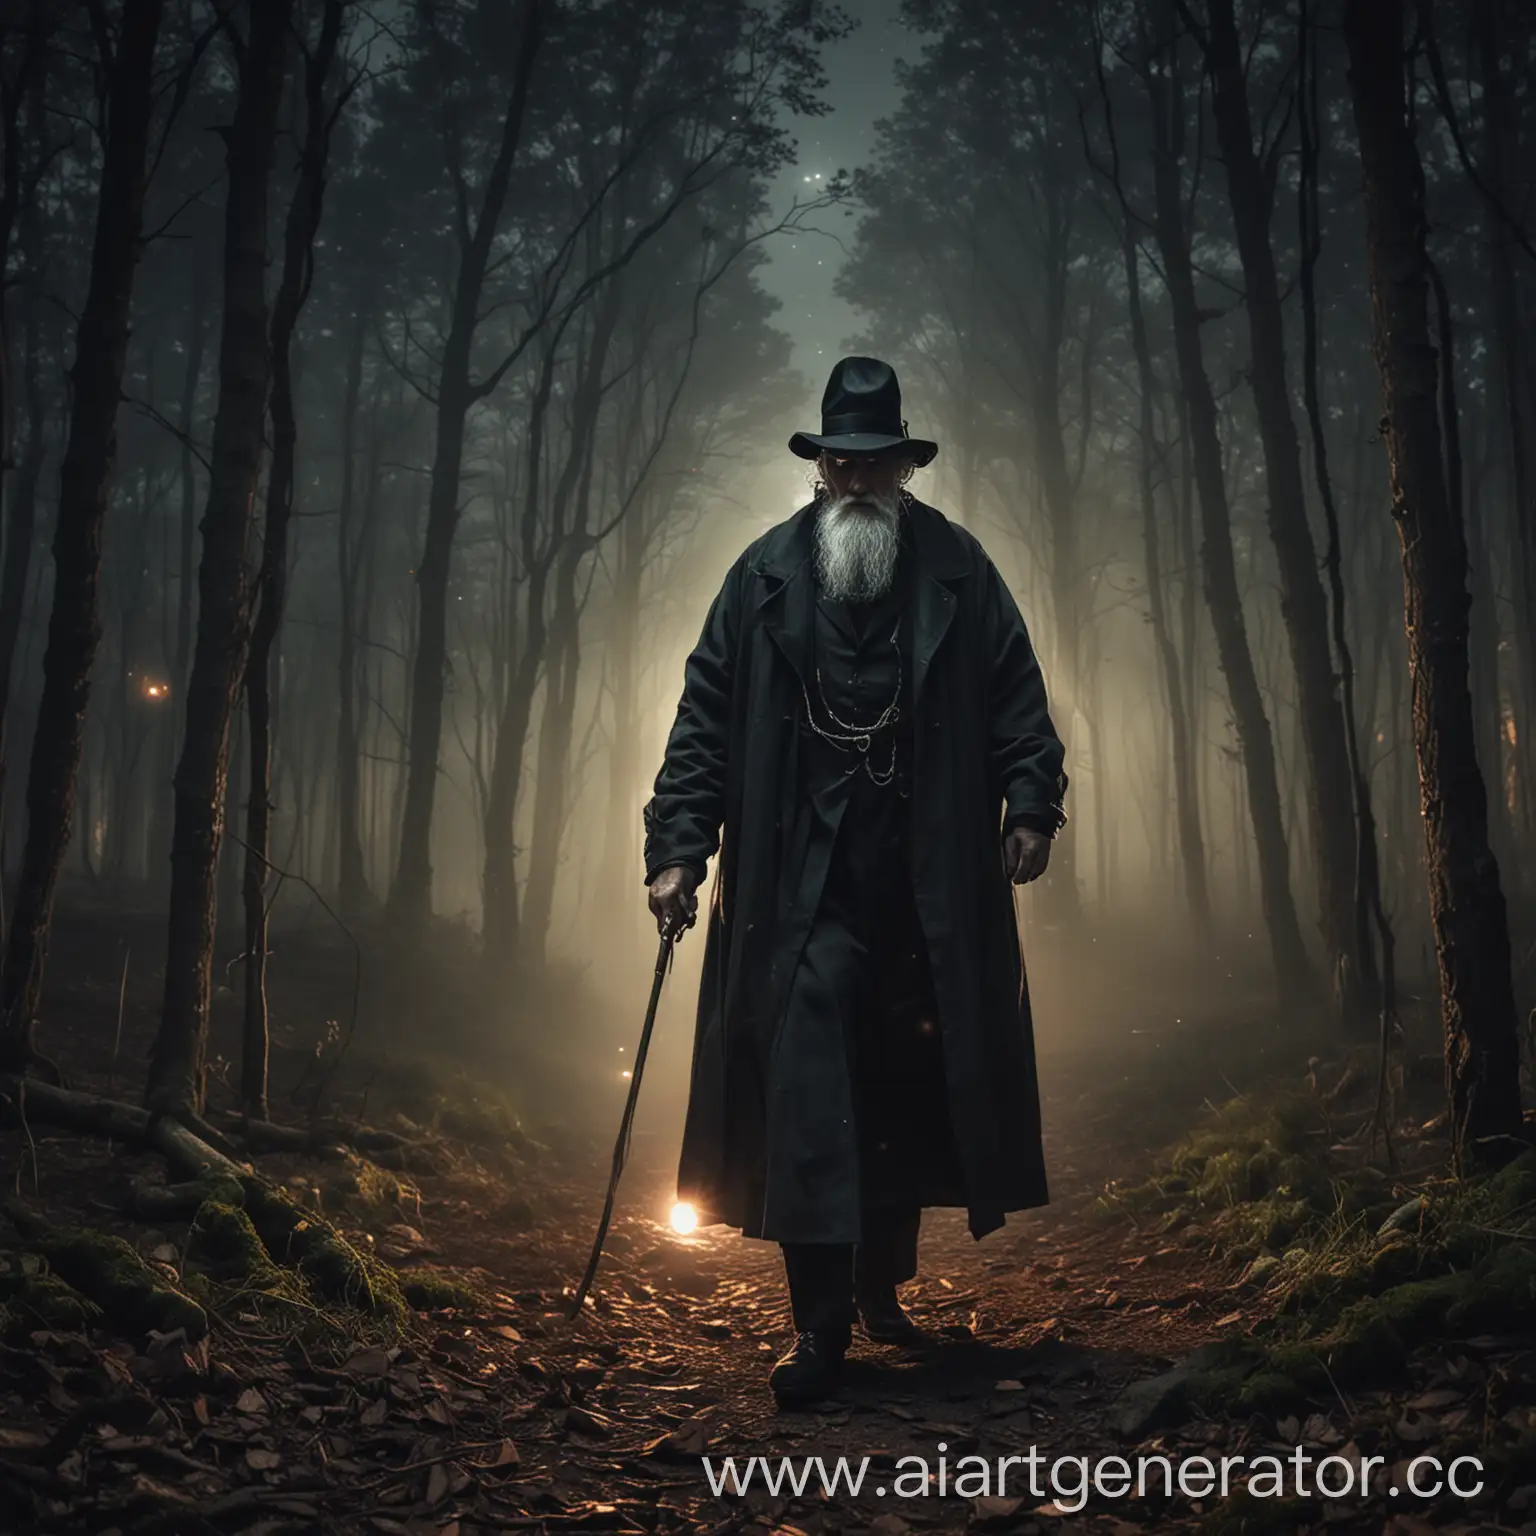 Elderly-Magician-Wanders-Through-Enchanted-Forest-at-Night